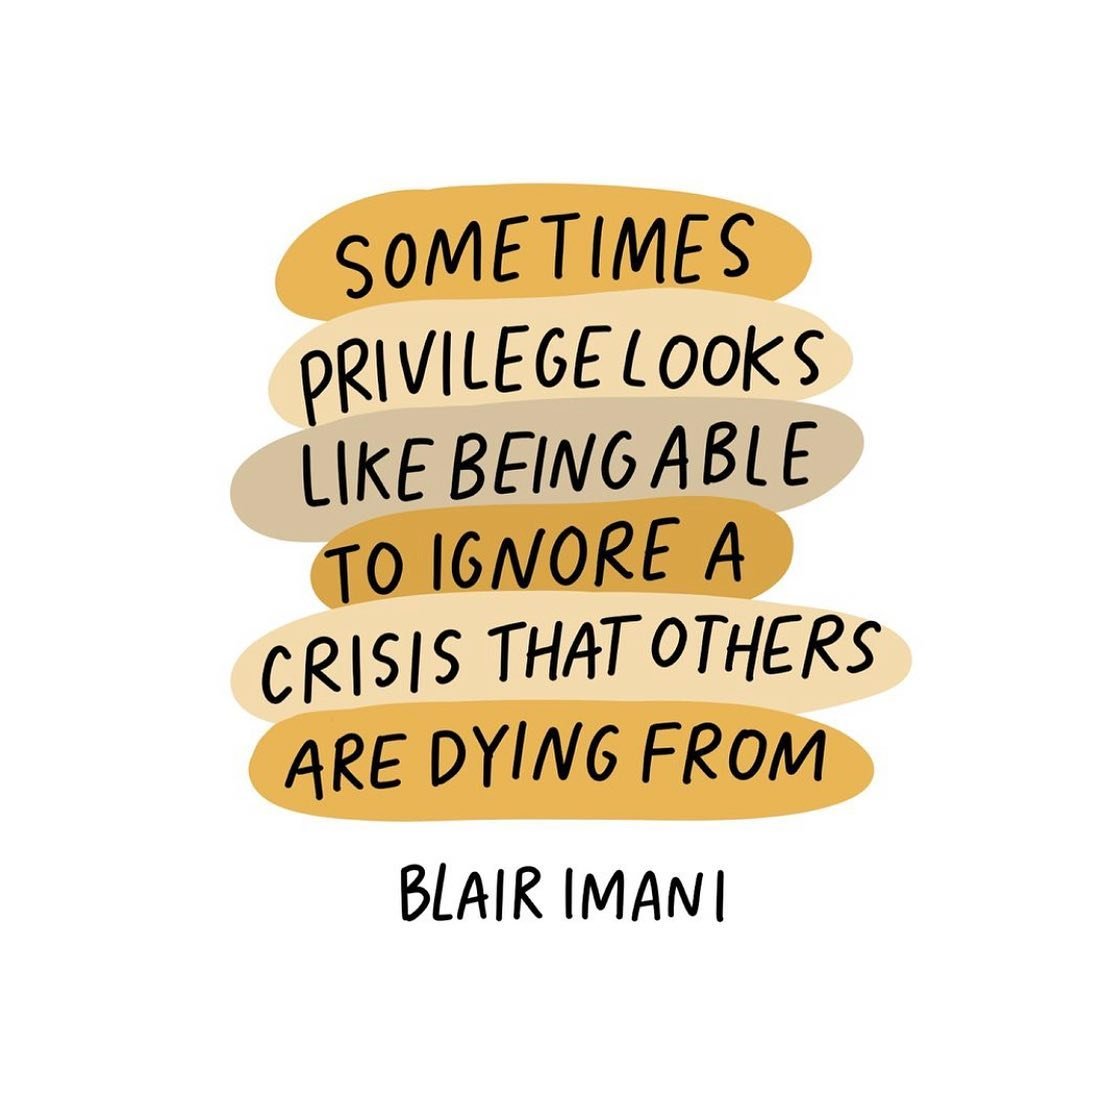 &ldquo;Sometimes privilege looks like being able to ignore a crisis that others are dying from&rdquo; these are powerful words from author and activist Blair Imani. The statement was initially regarding anti-trans hatred, but is absolutely applicable